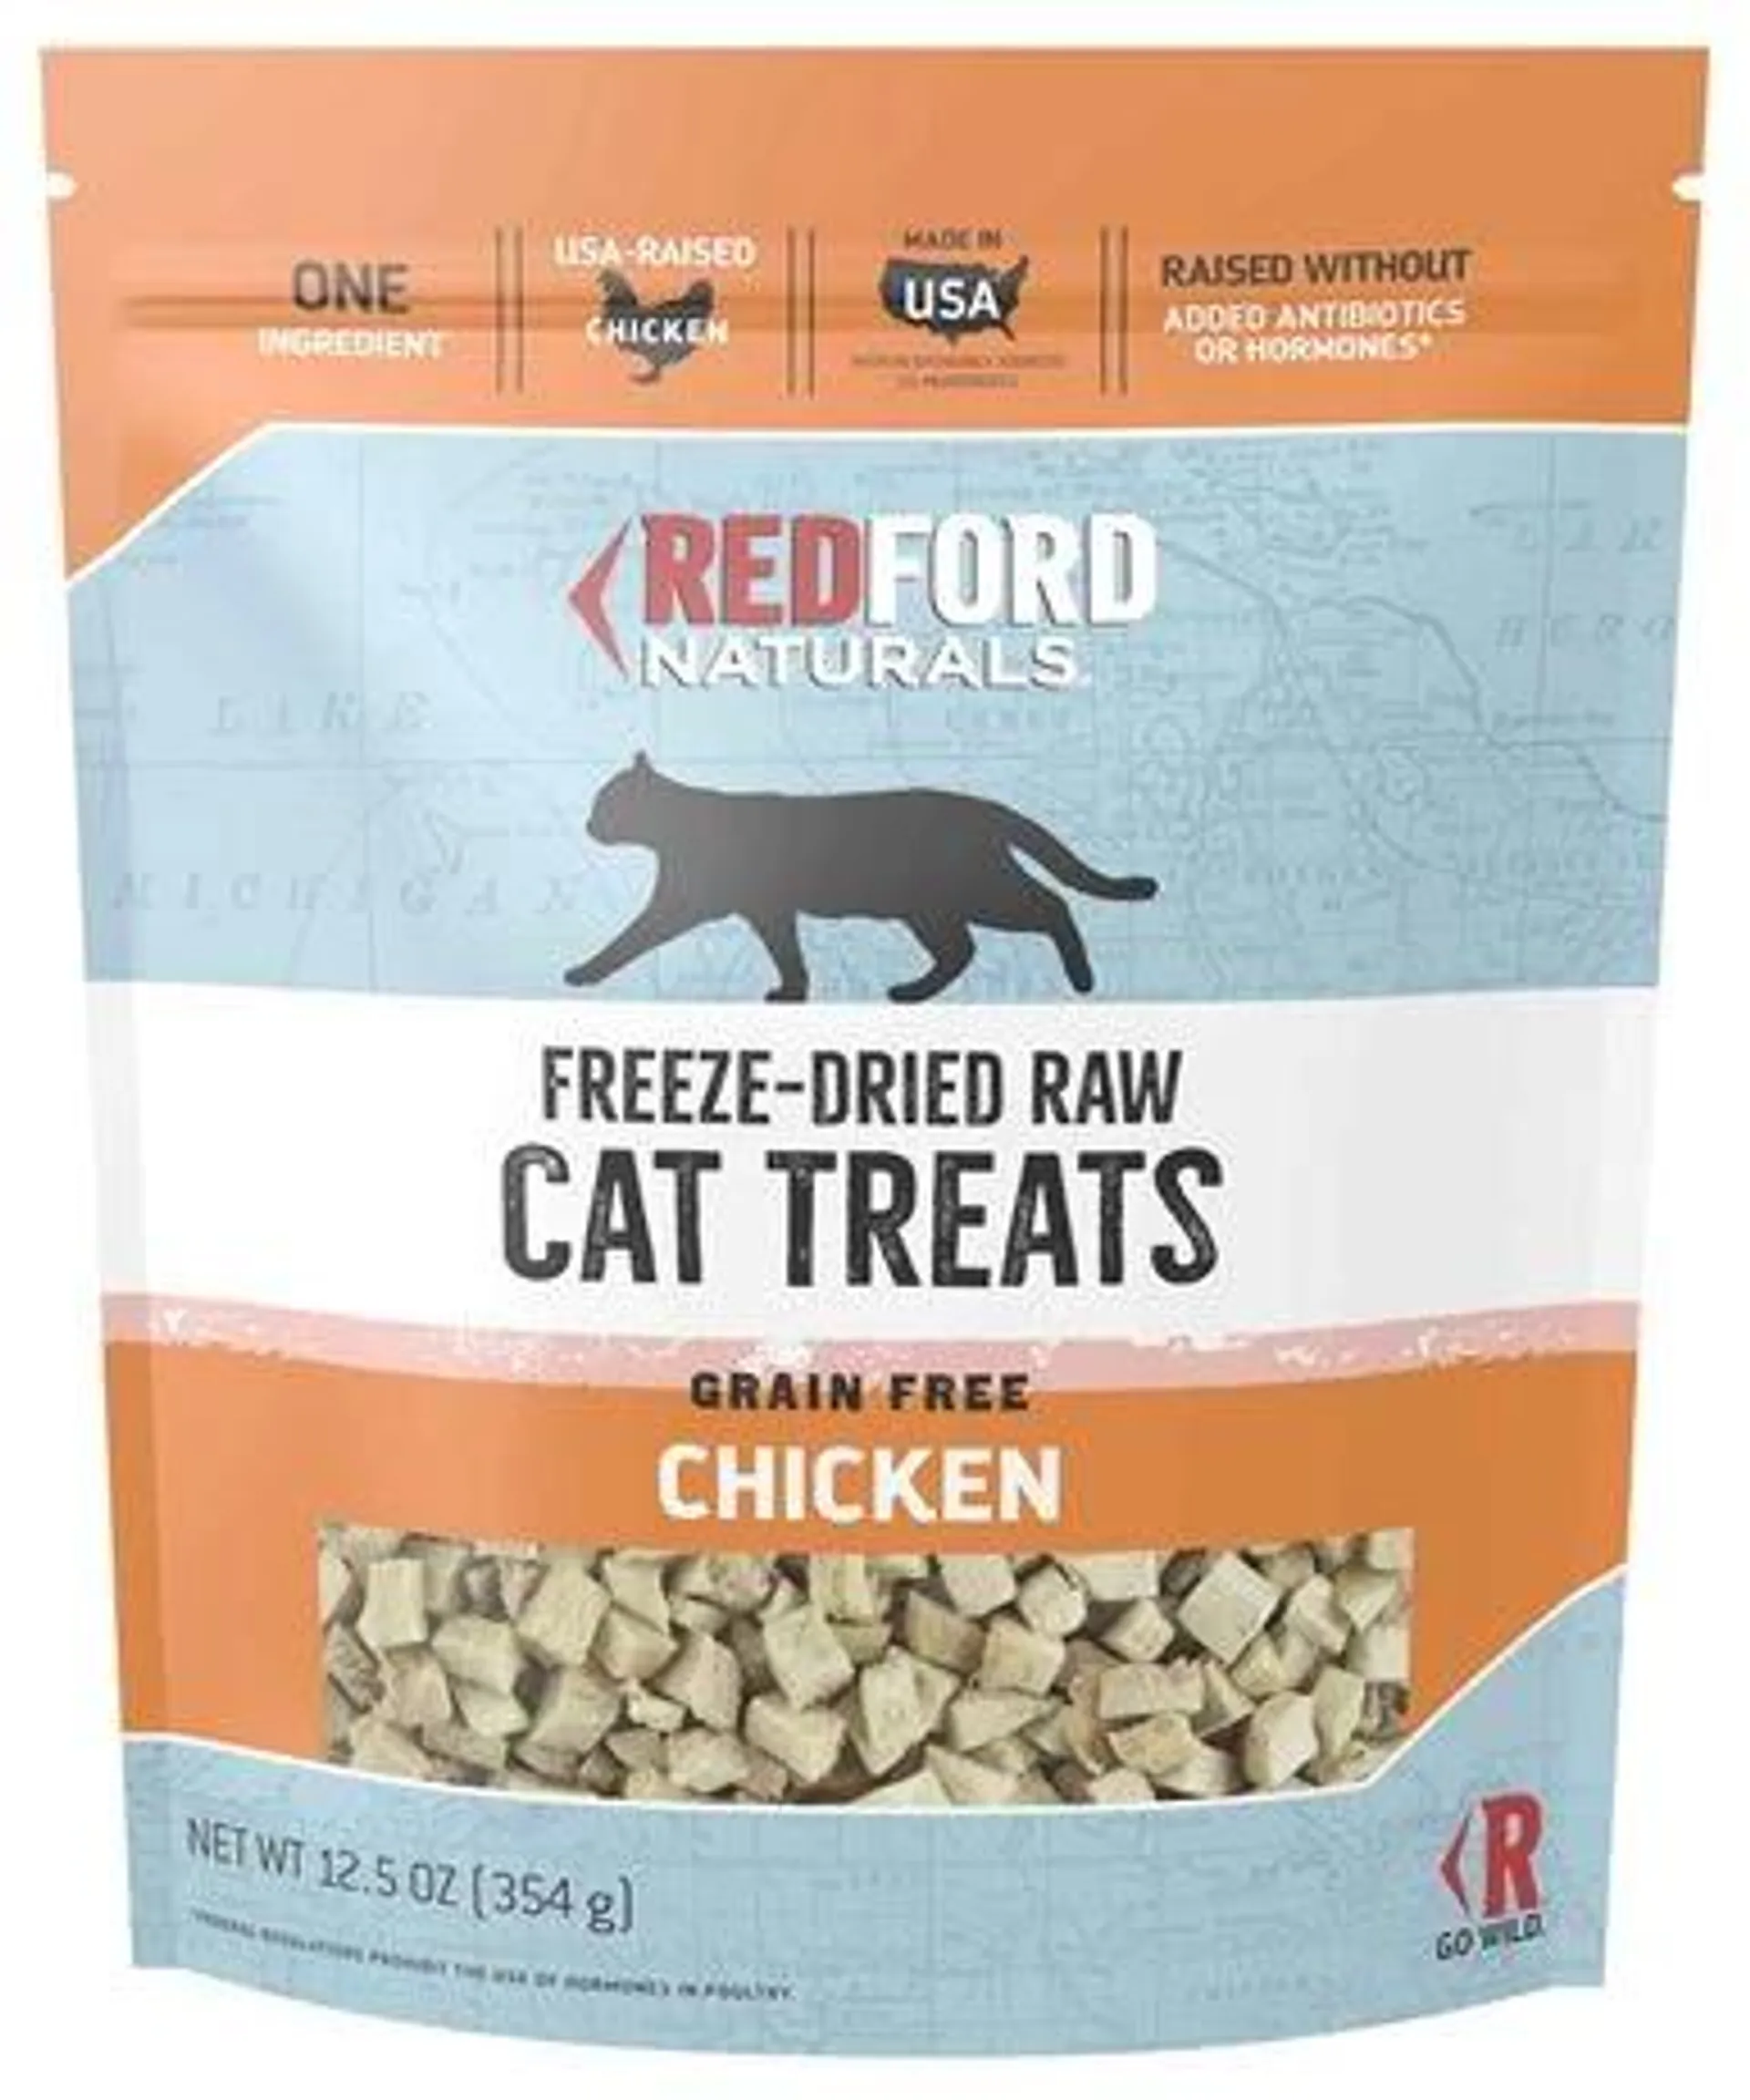 Redford Naturals Freeze-Dried Raw Grain Free Cat Treats, Chicken, 12.5 Ounces